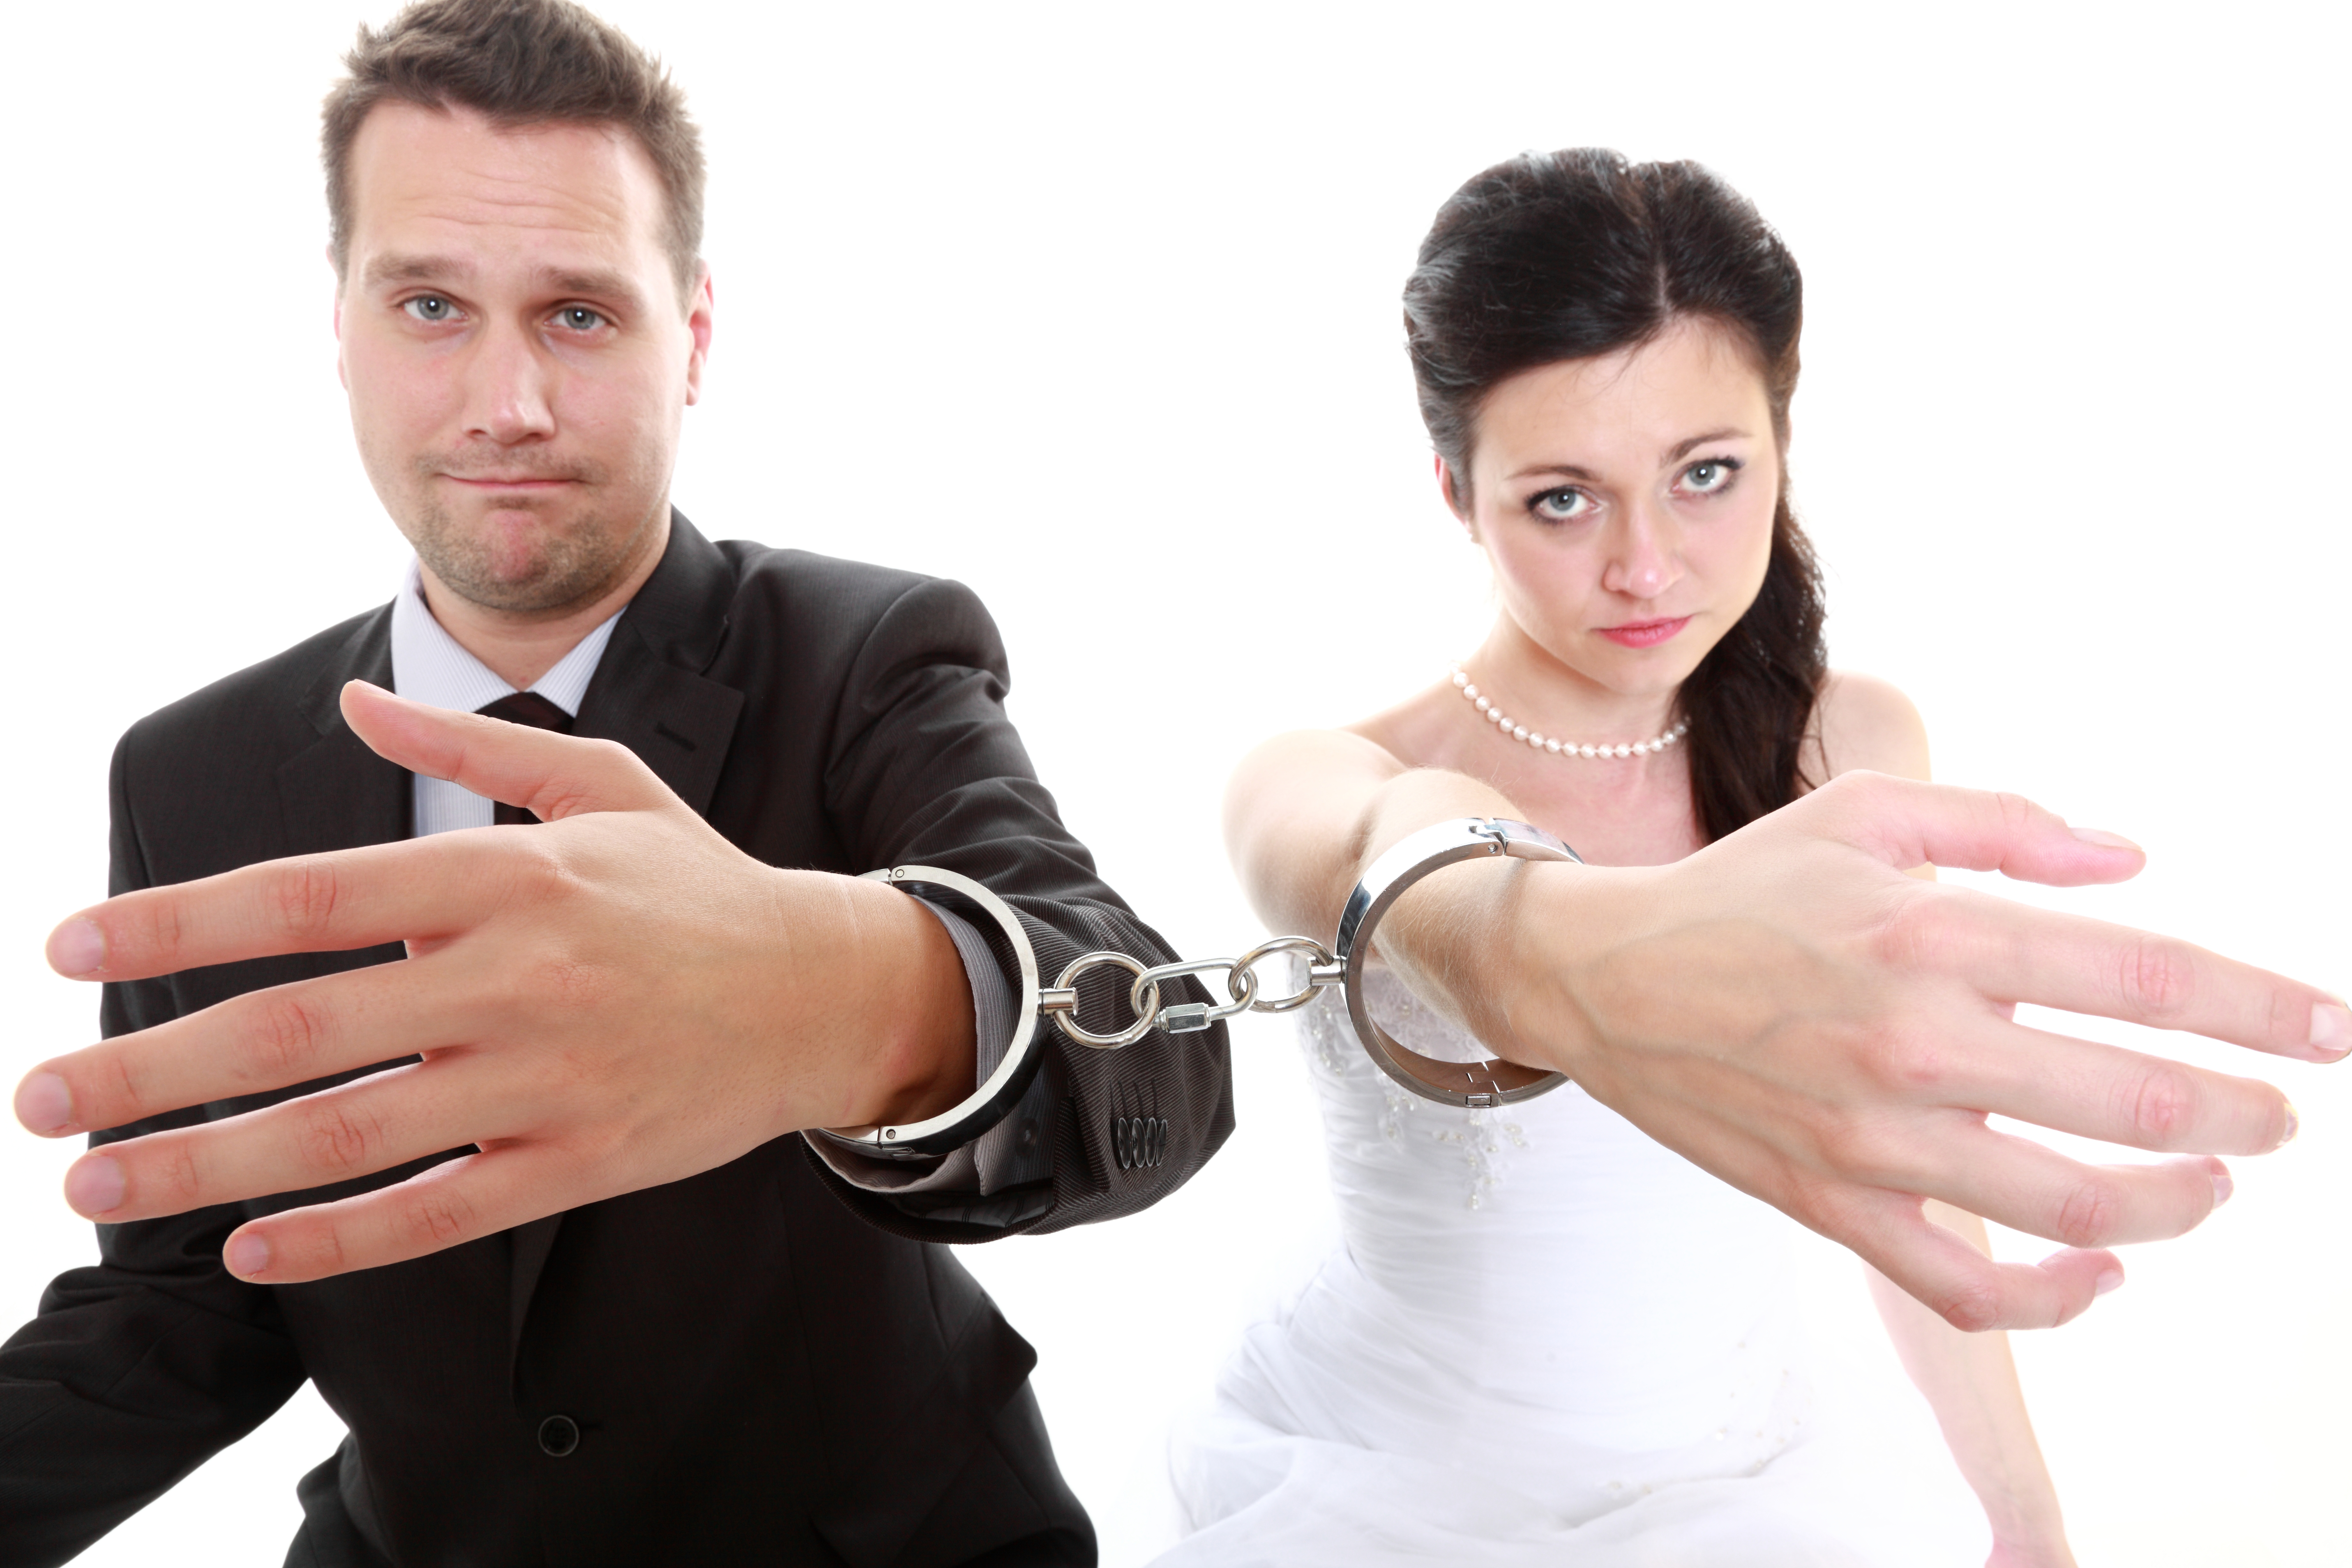 NYC Uncontested Divorce Attorney | Hoffmaier & Hoffmaier P.C.